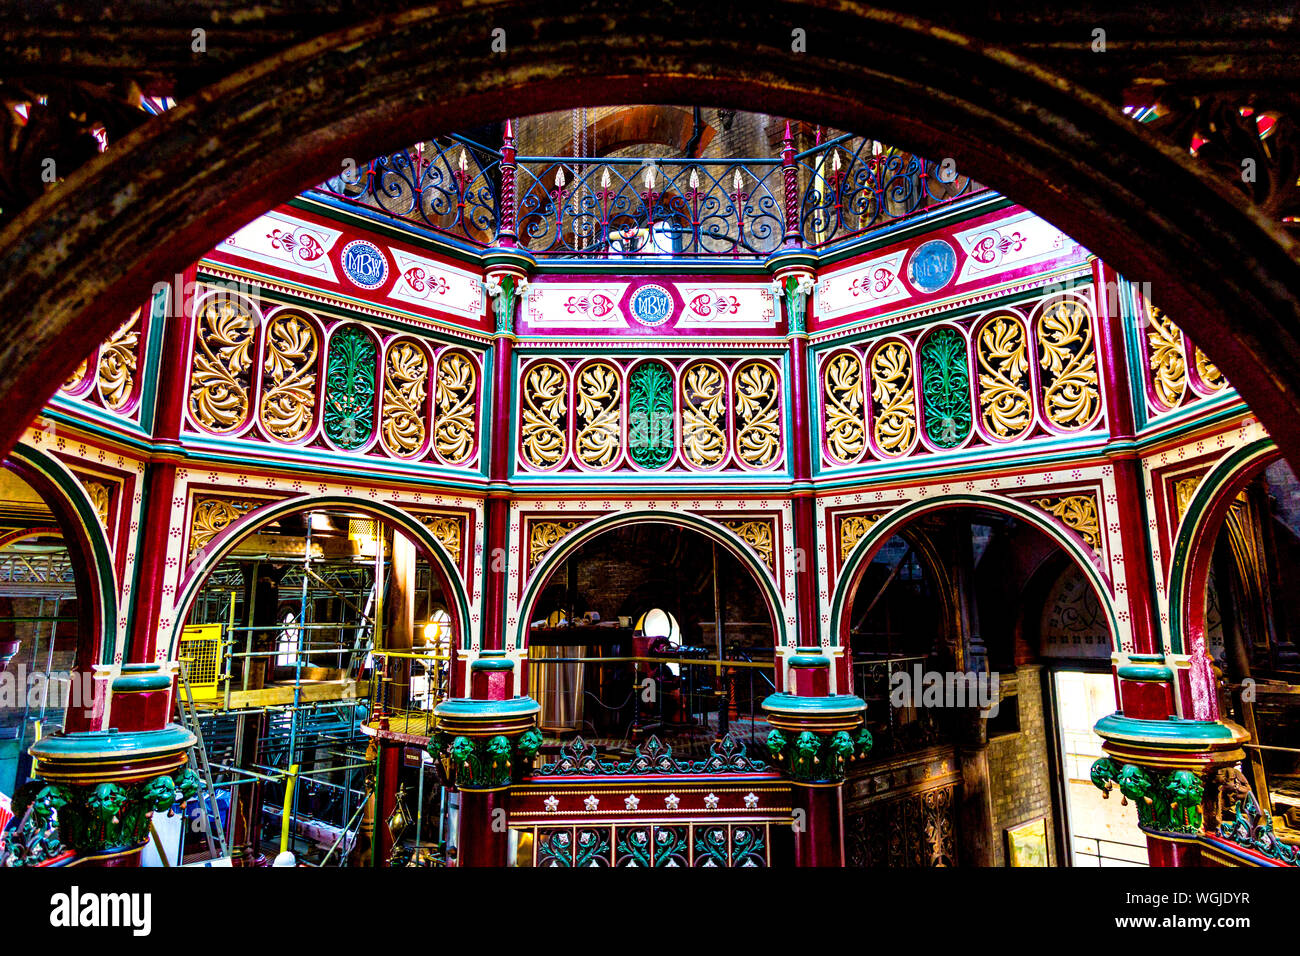 The colourful decorative ironwork of The Octagon at the Victorian Crossness Pumping Station, UK Stock Photo